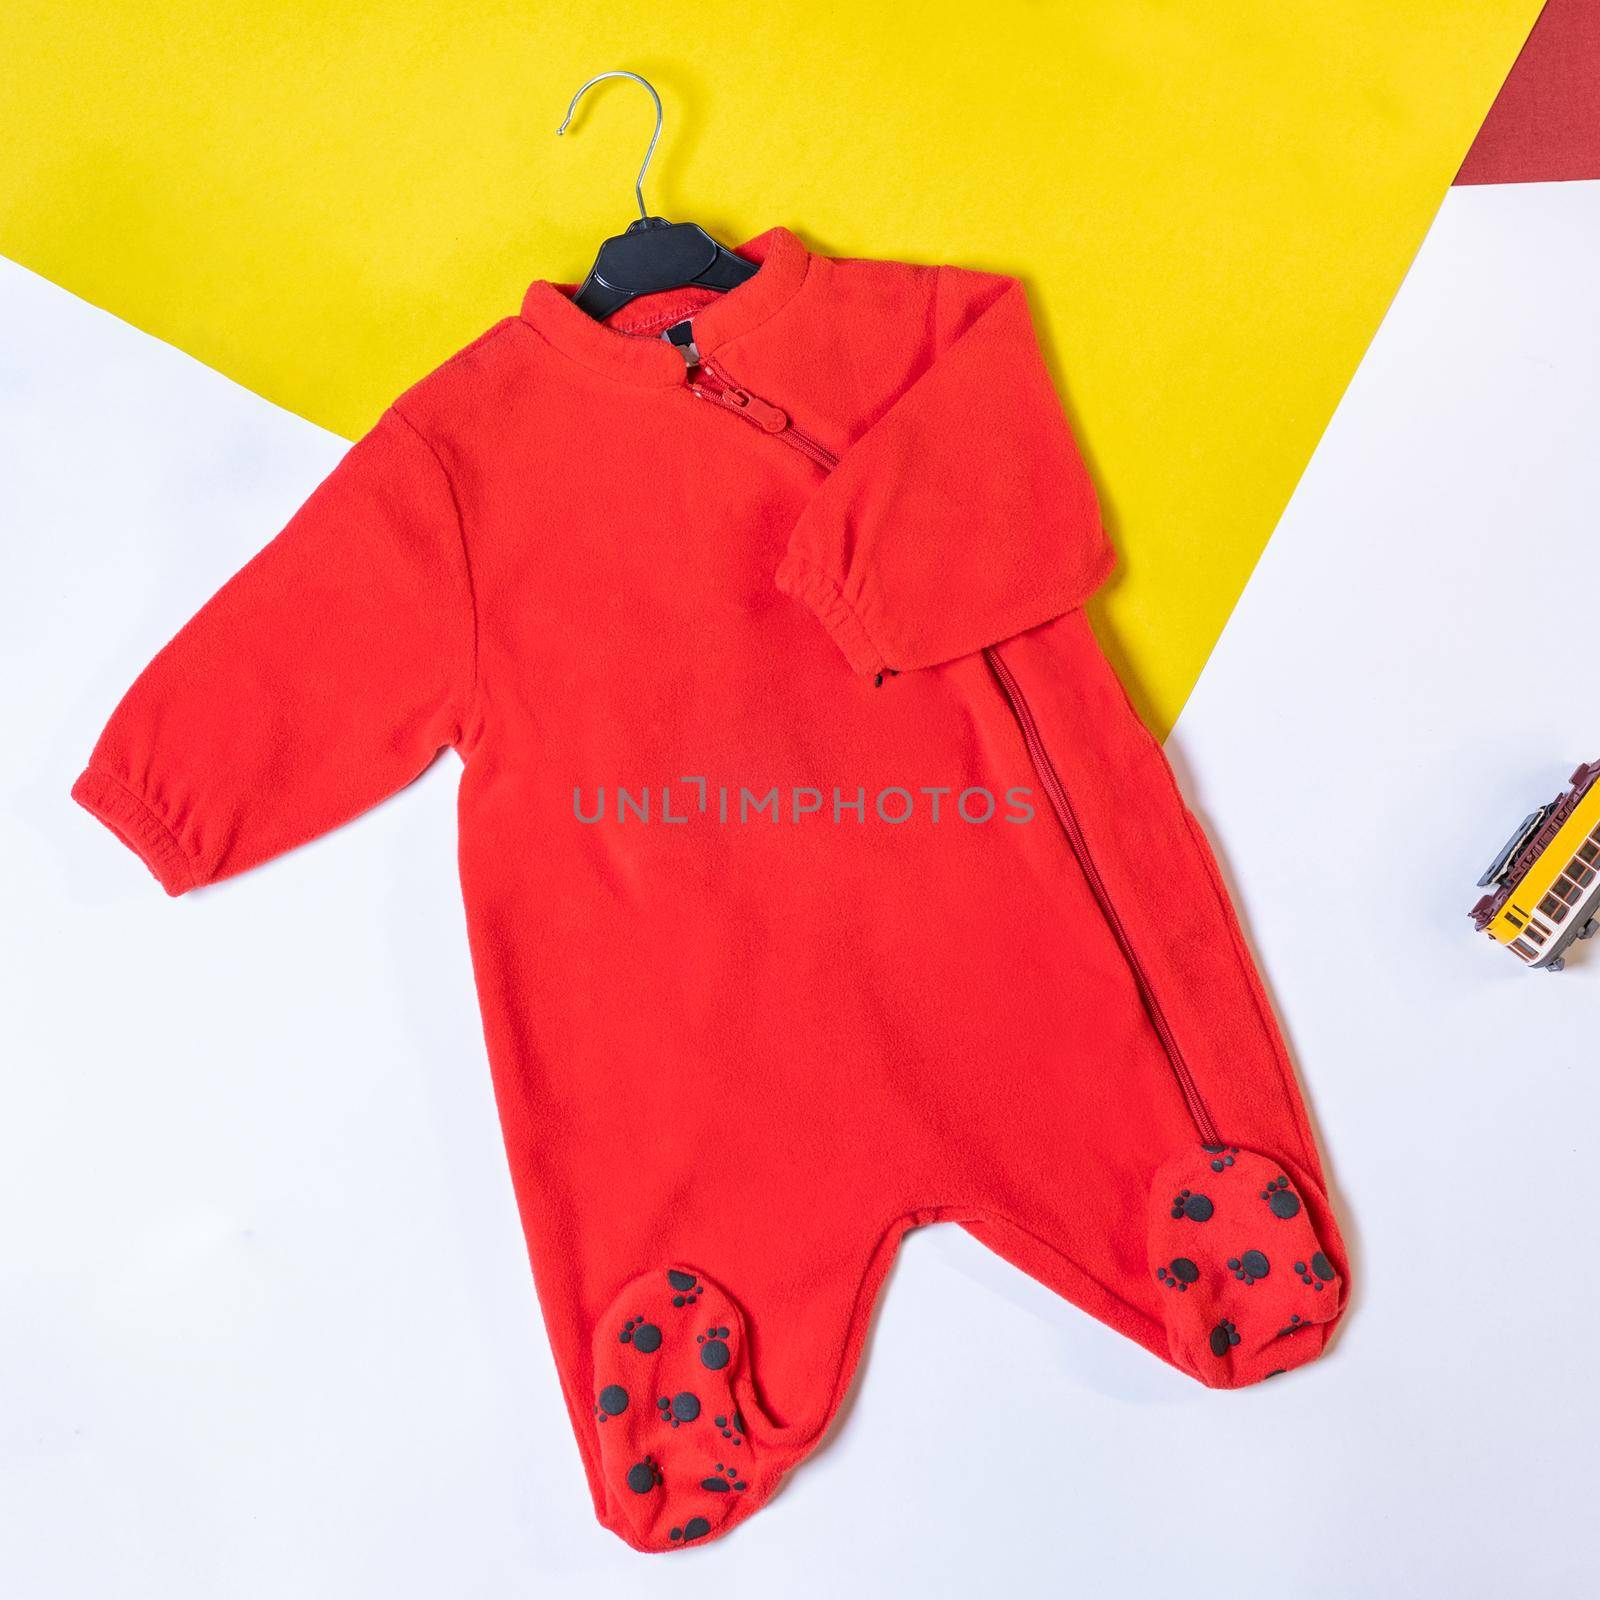 Kids red sports suit isolated on colorful background